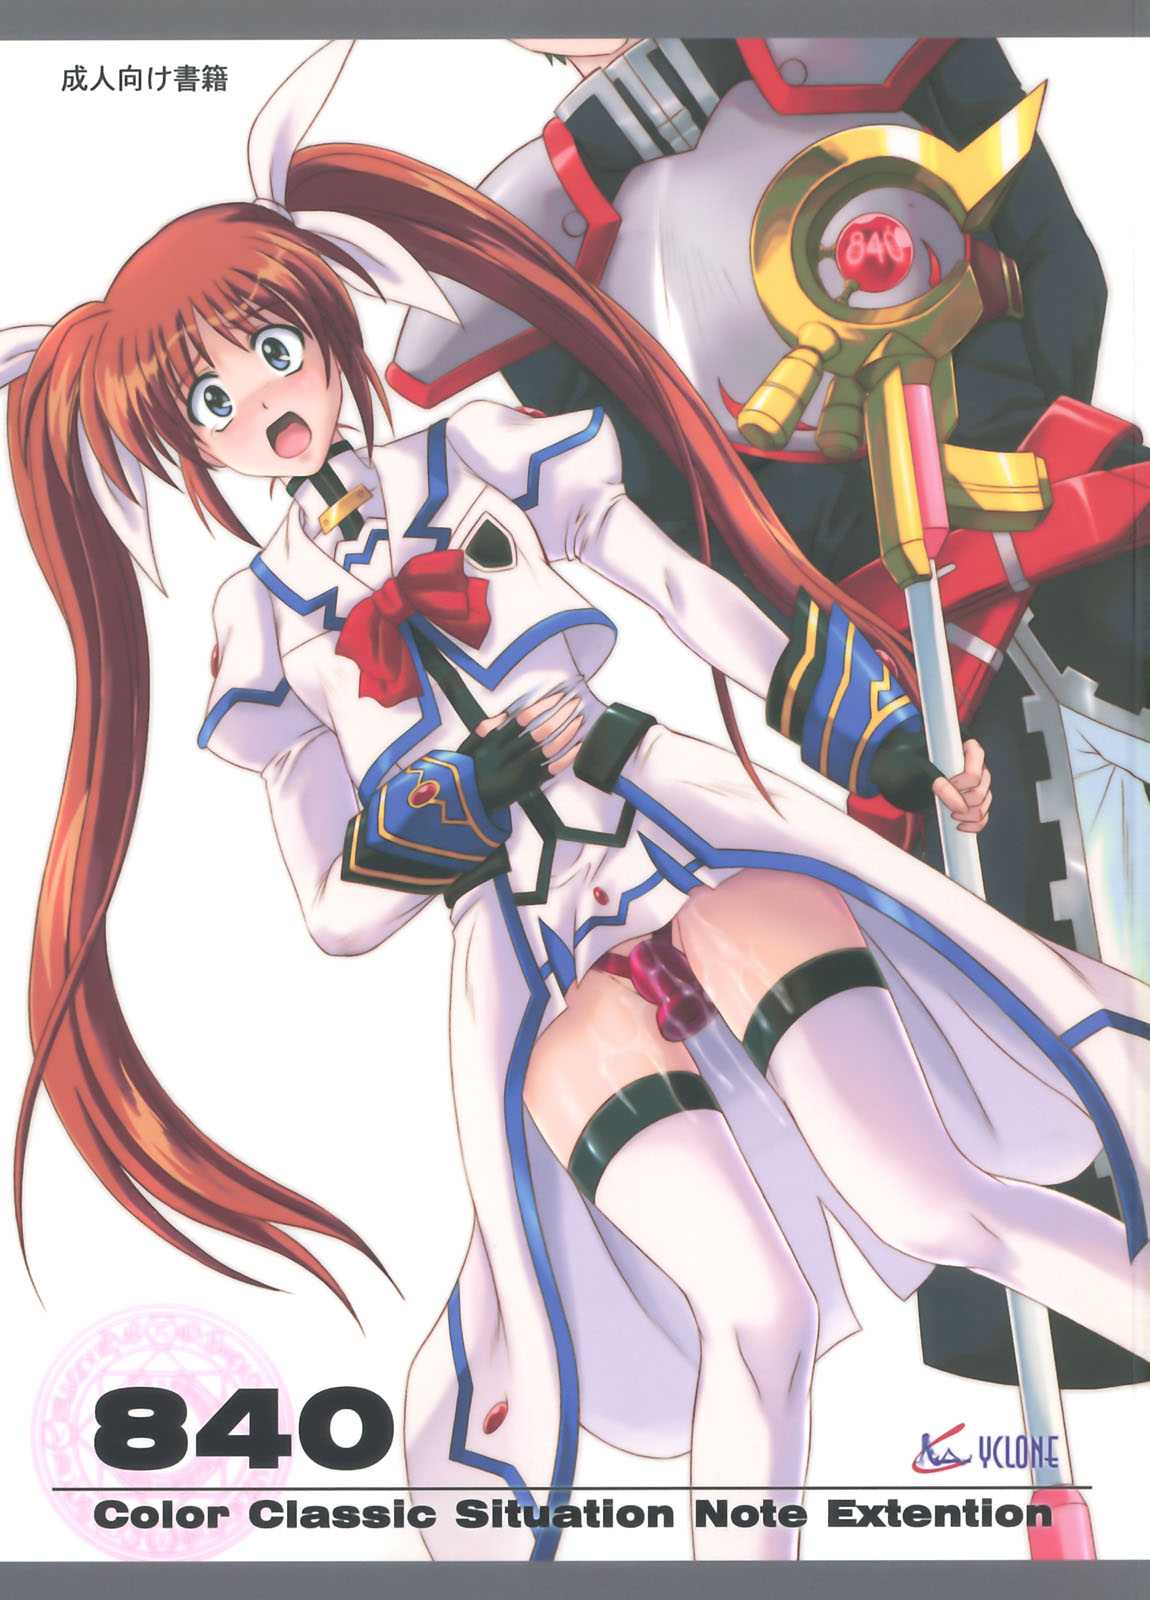 [CYCLONE] 840 -Color Classic Situation Note Extention- (nanoha) 